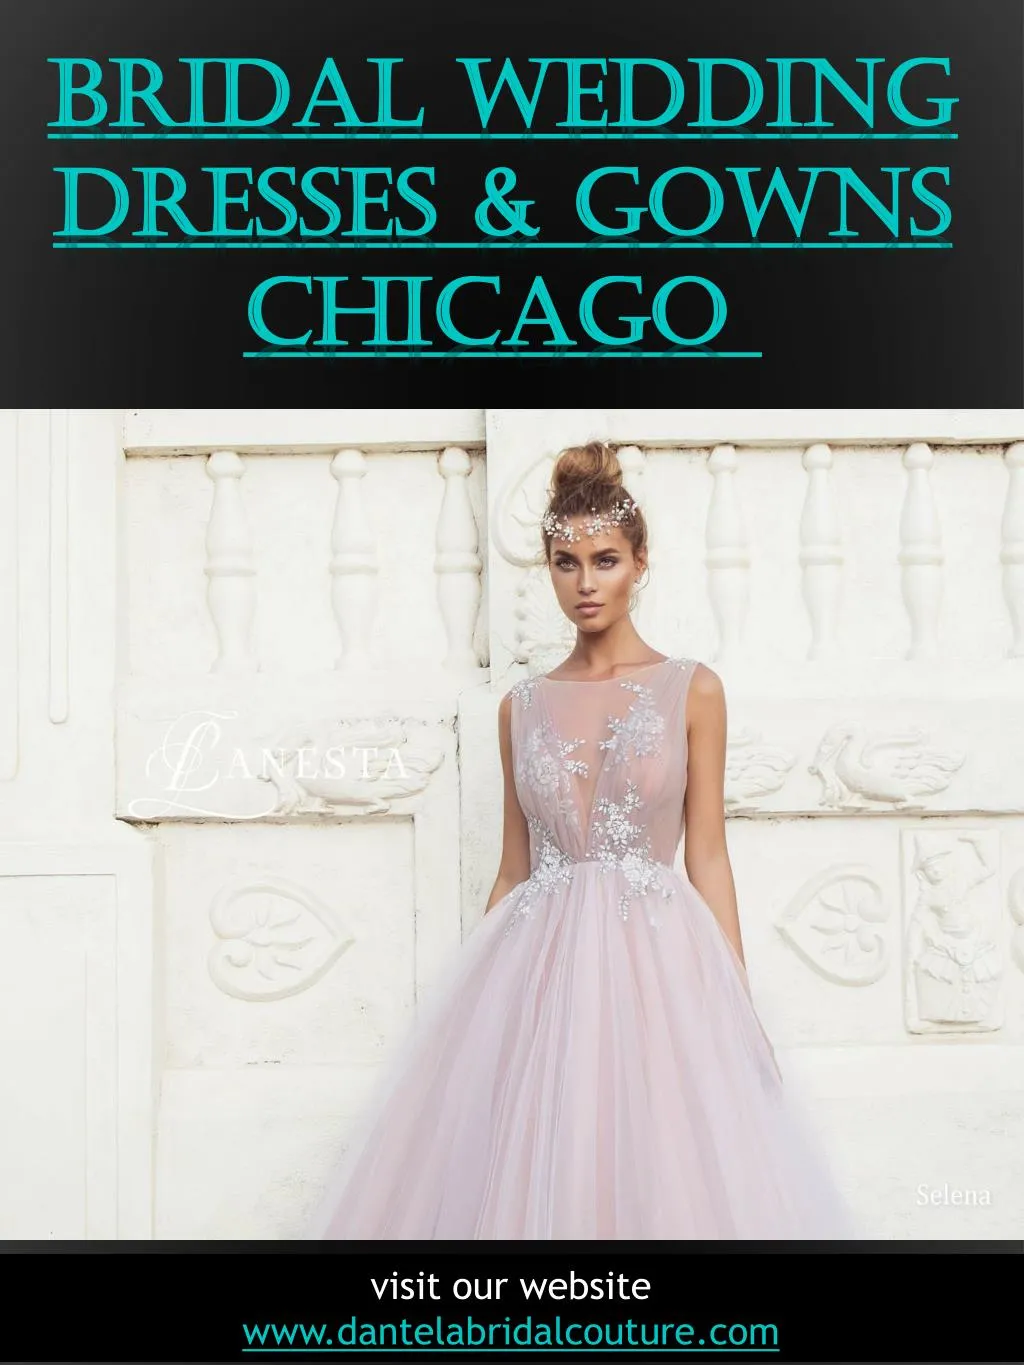 bridal wedding dresses gowns chicago